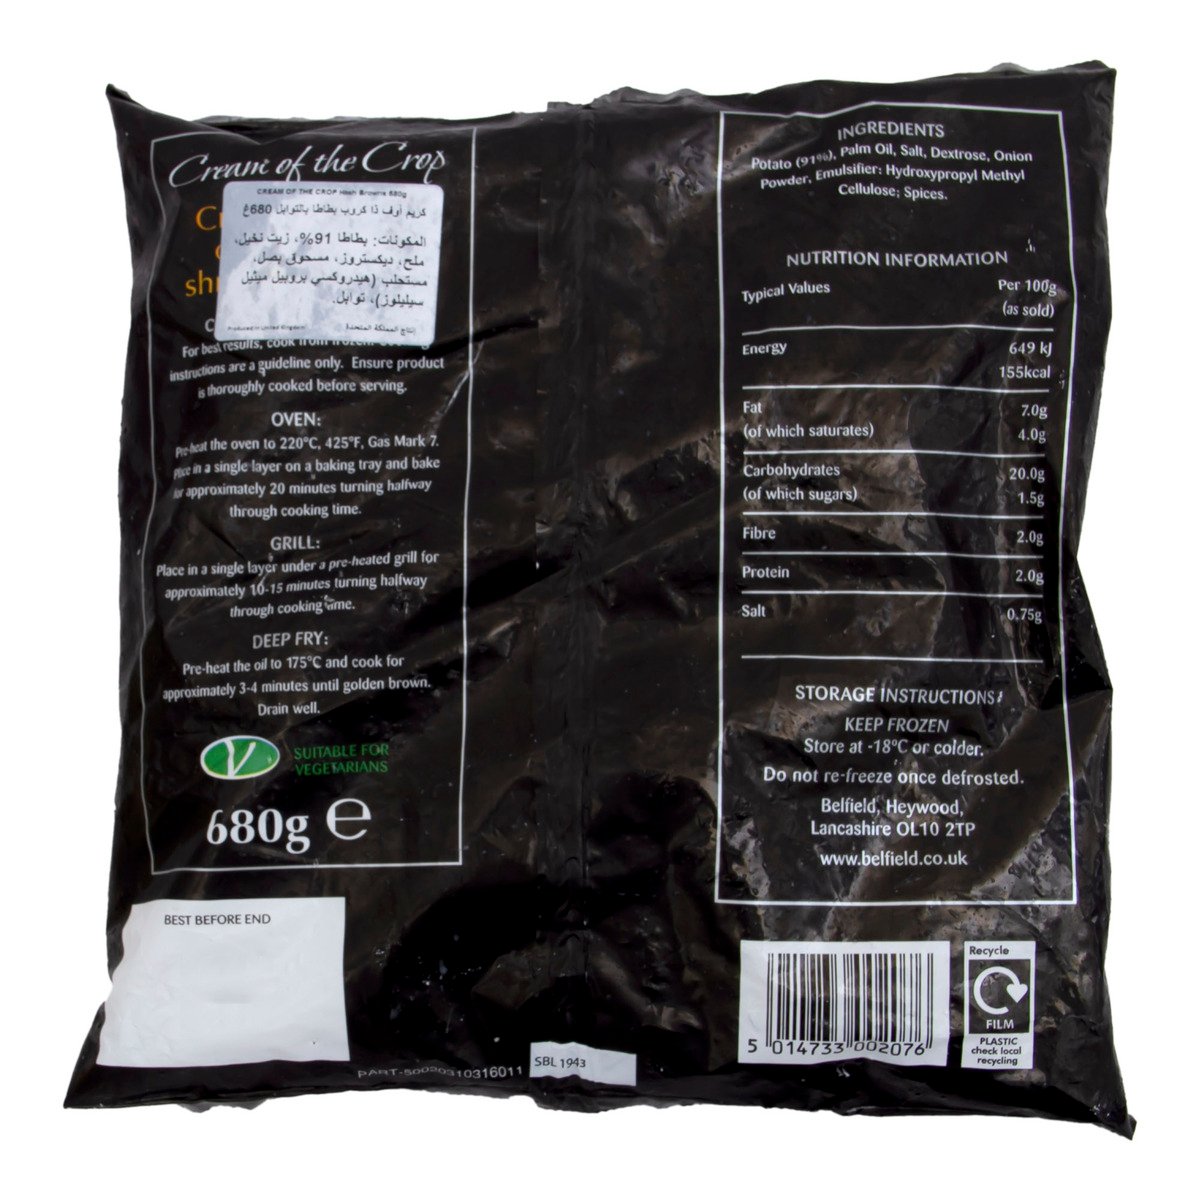 Cream Of The Crop Hash Browns 680 g